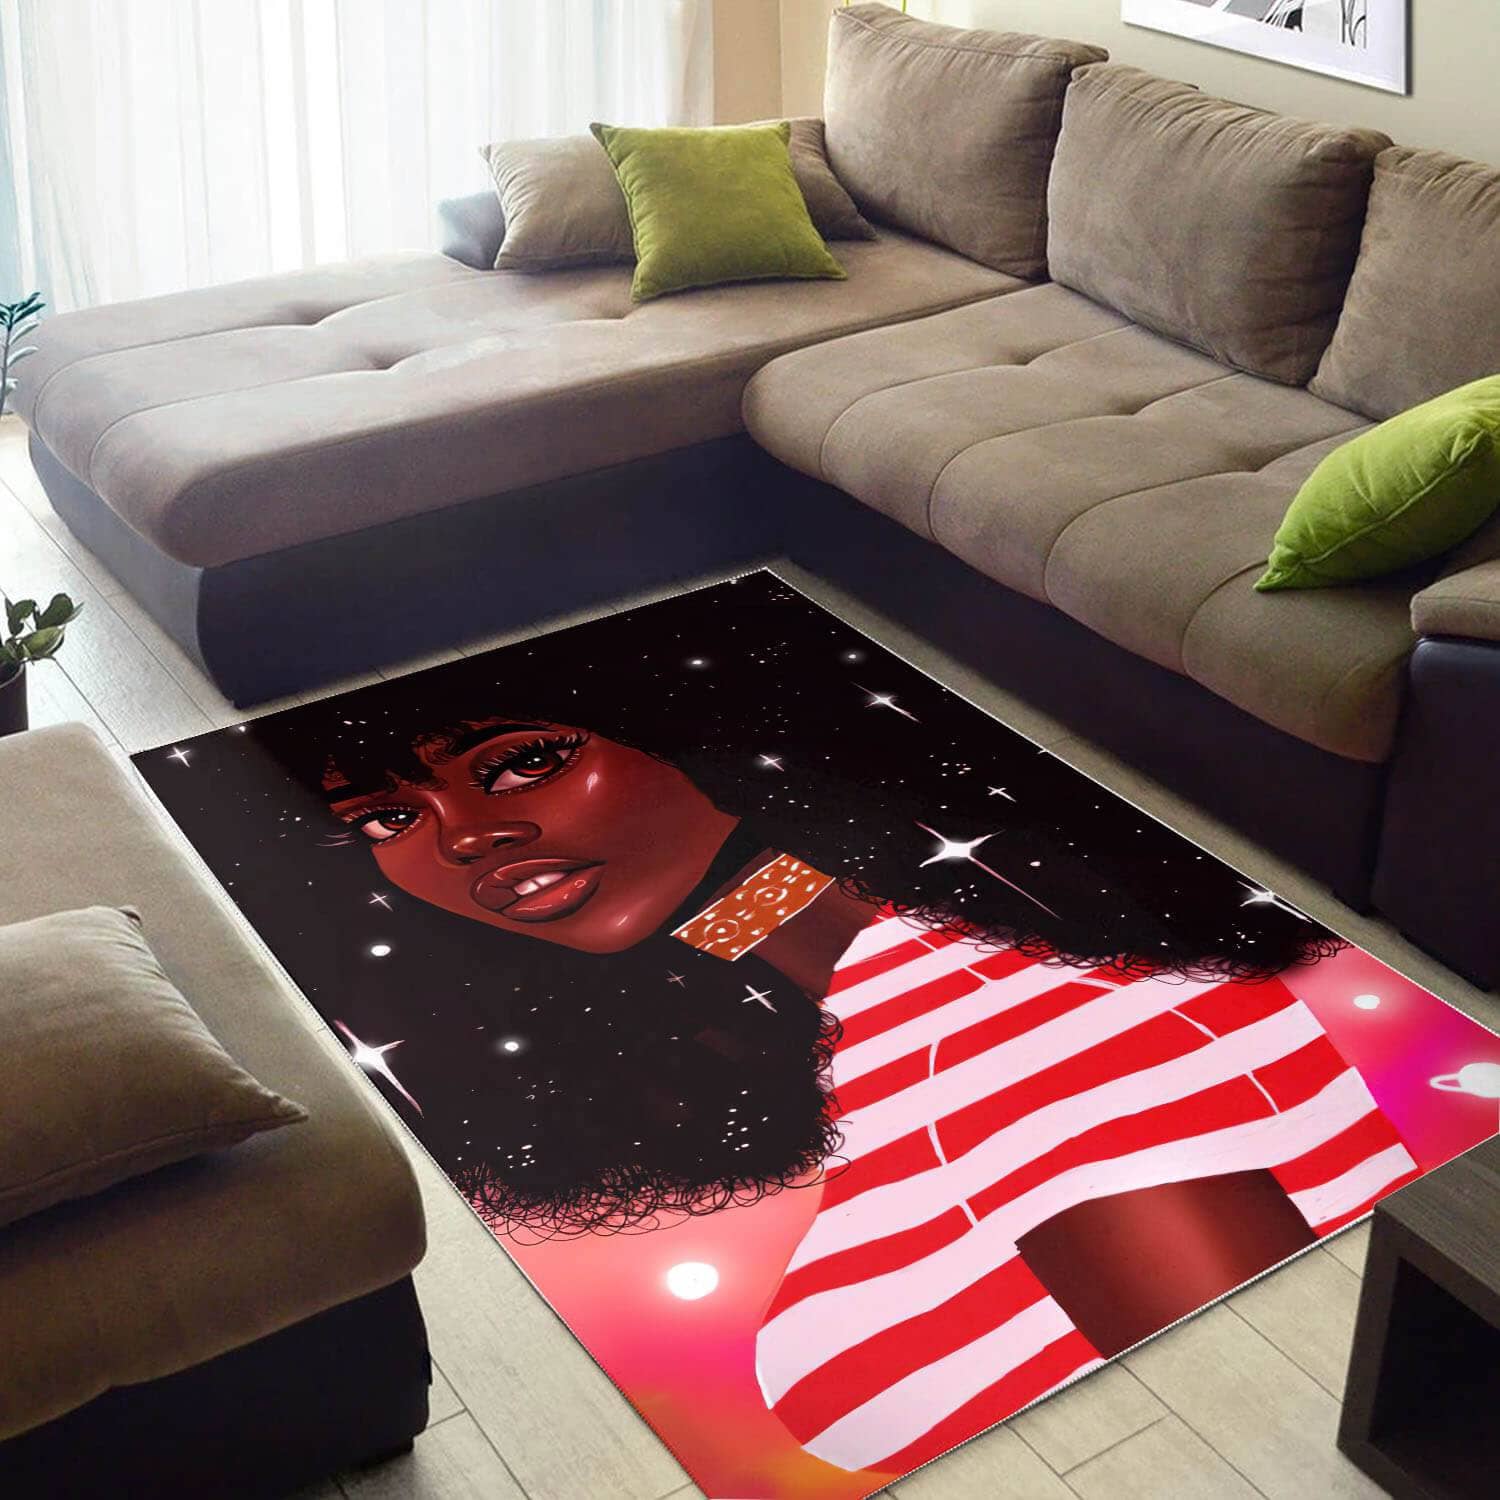 African Pretty Afrocentric Lady American Print Themed Rug